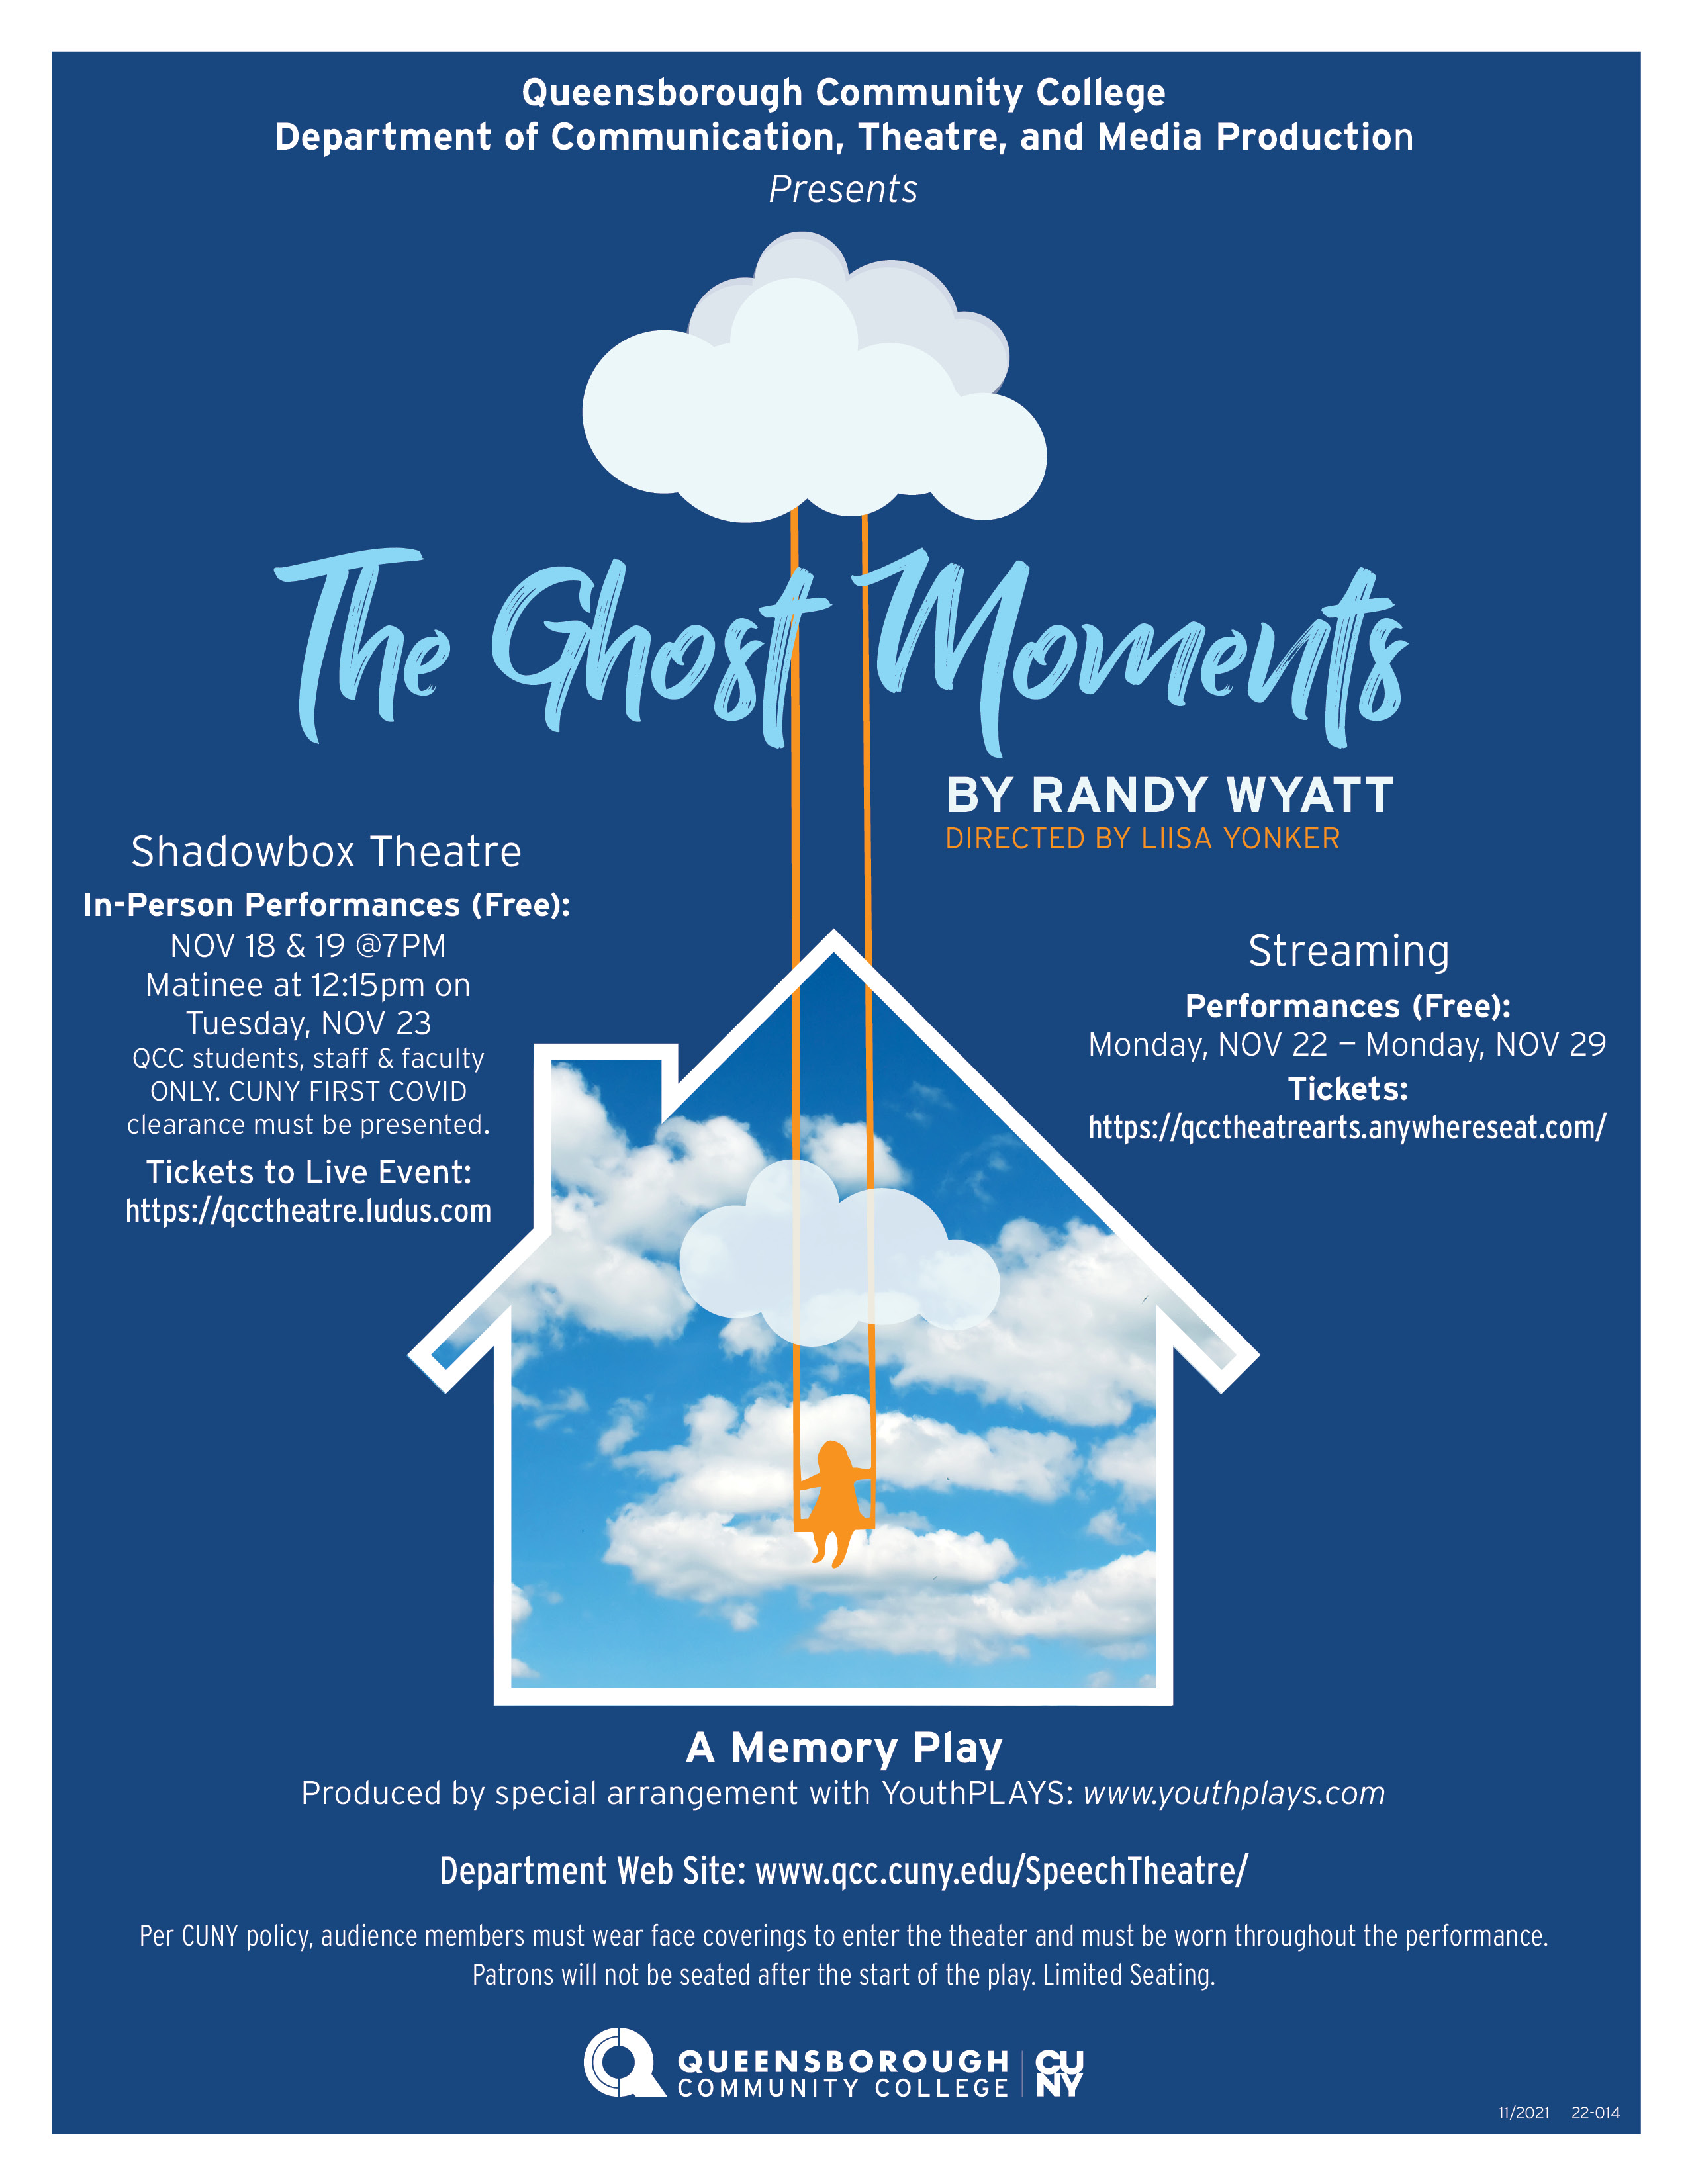 This is a poster for the fall 2021 in-person and online streamed production of ‘The Ghost Moments’ by Randy Wyatt and Directed by Professor Yonker. The poster displays a lone young individual on a swing suspended in a house set against the backdrop of a blue sky and clouds.